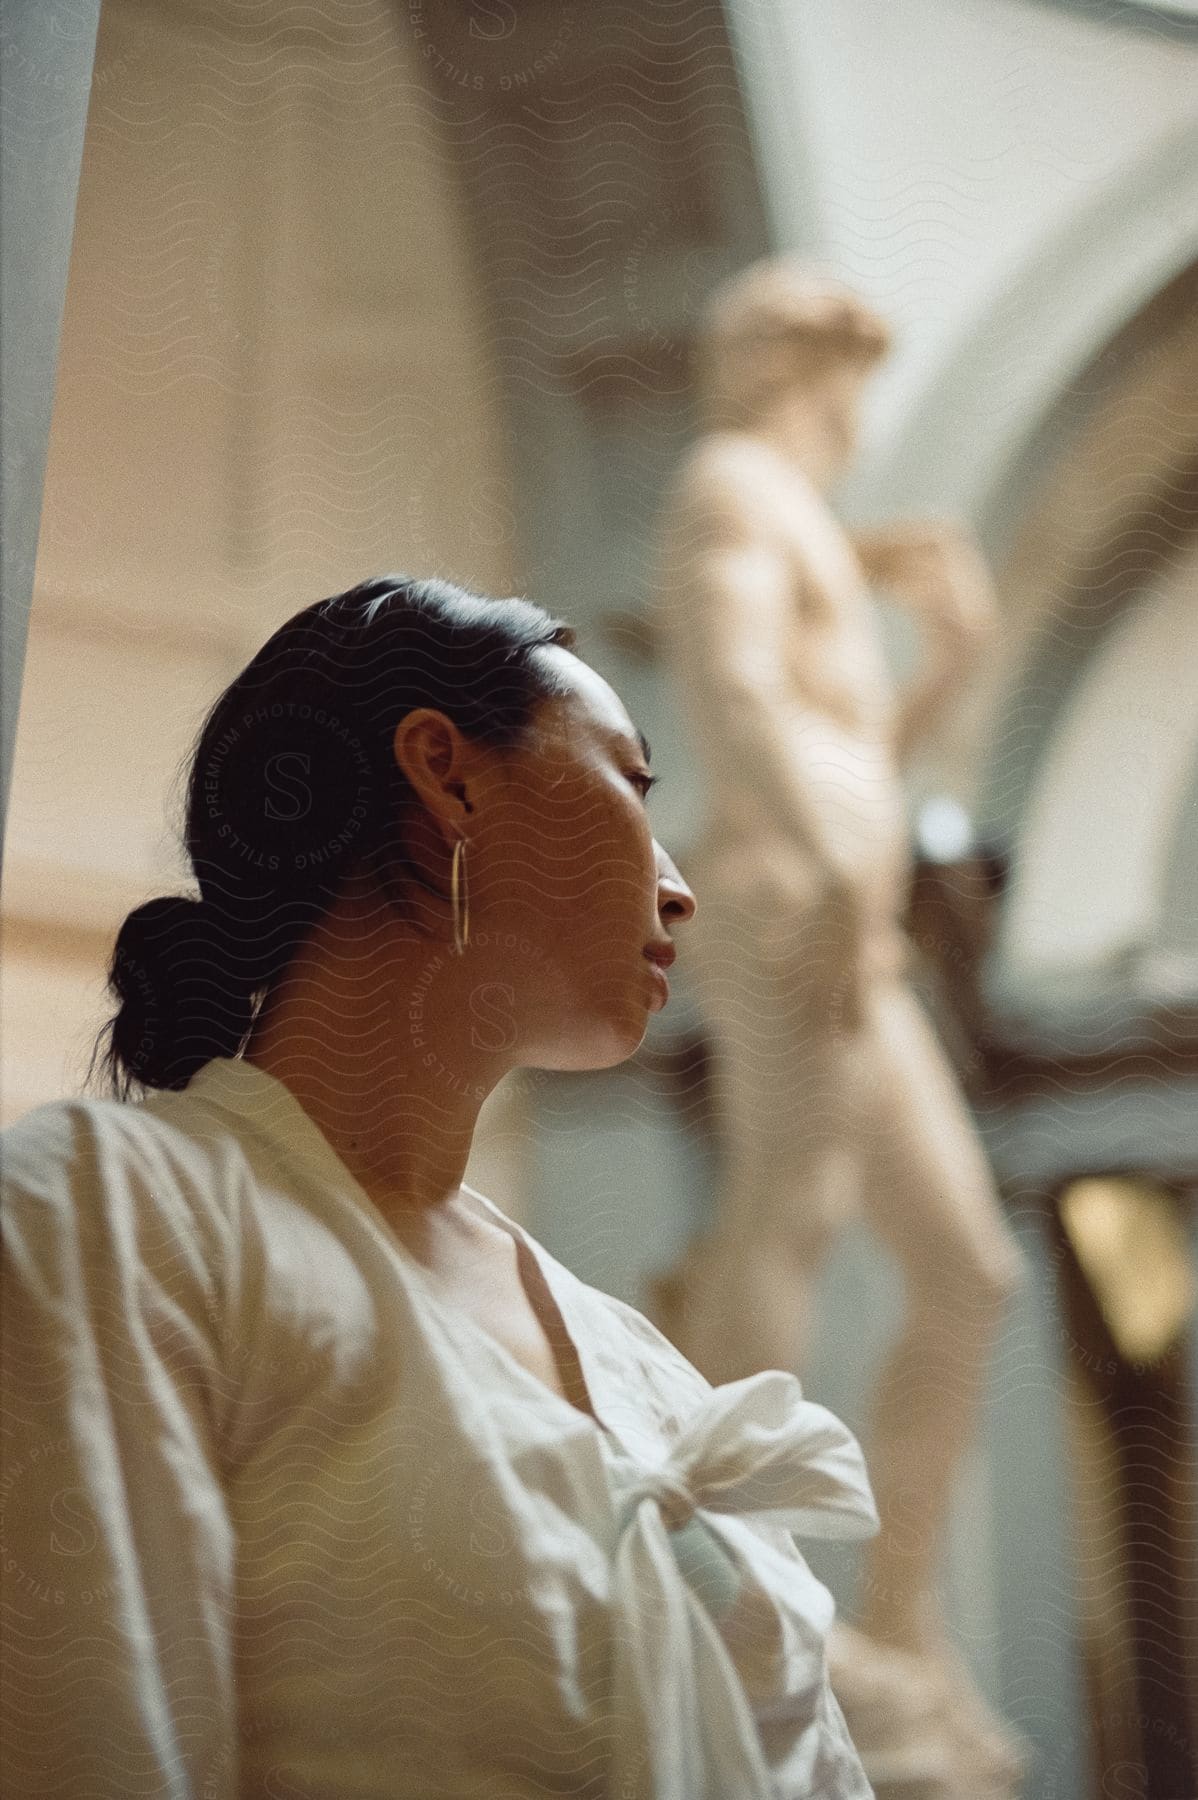 Side view of the upper body of a woman wearing a white top with black hair tied up.